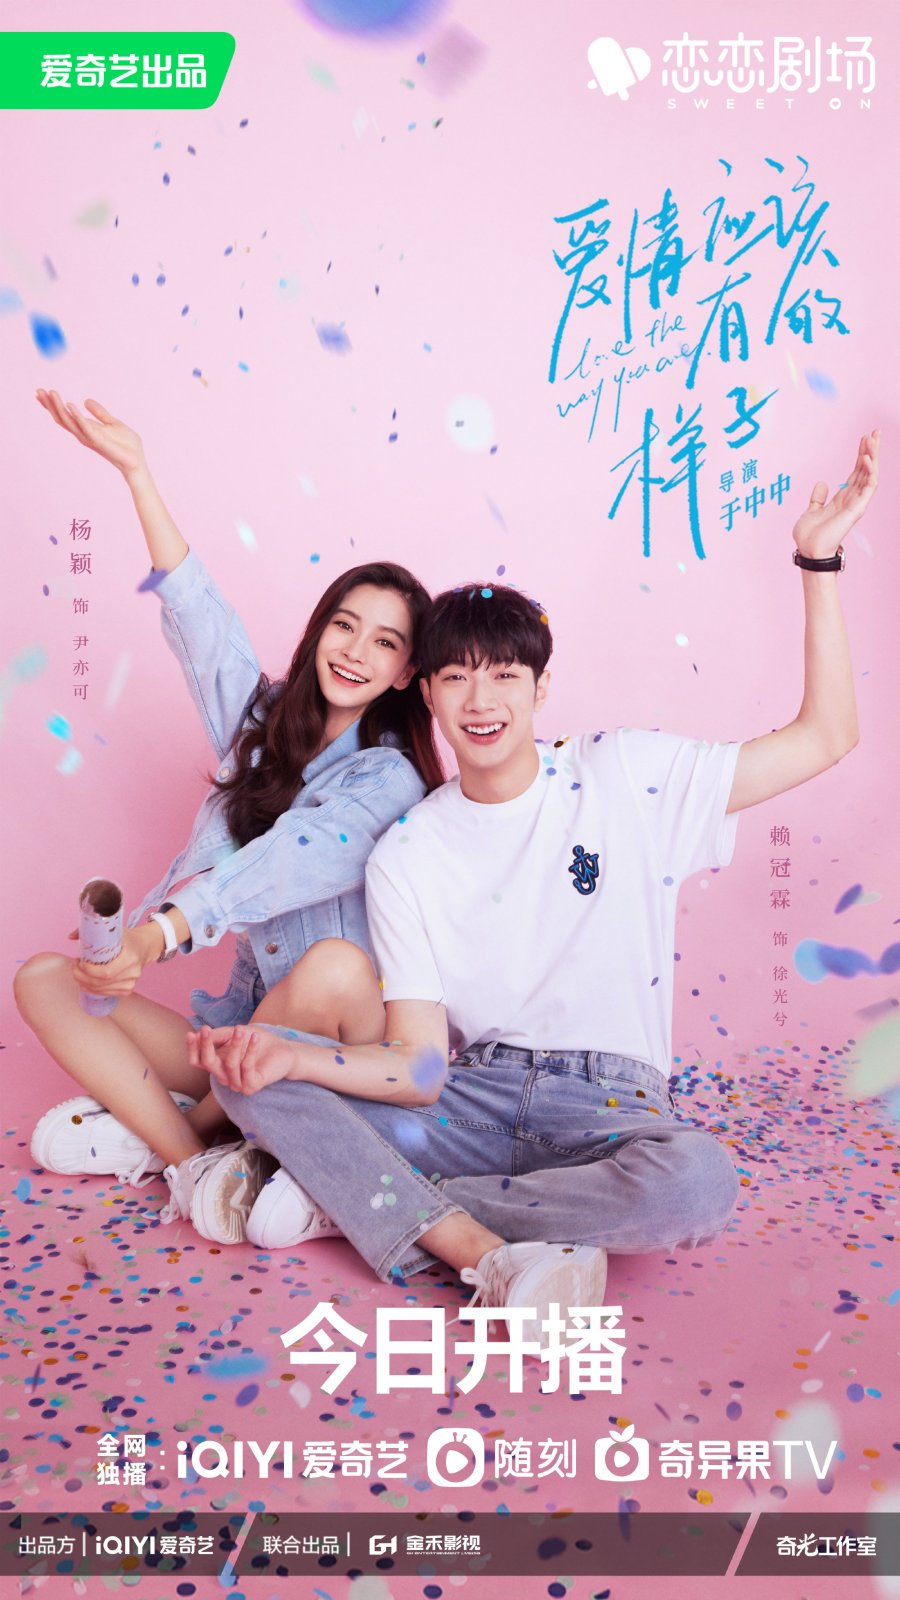 New OWN Drama 'Love Is_' Goes Deep On Relationships This Summer